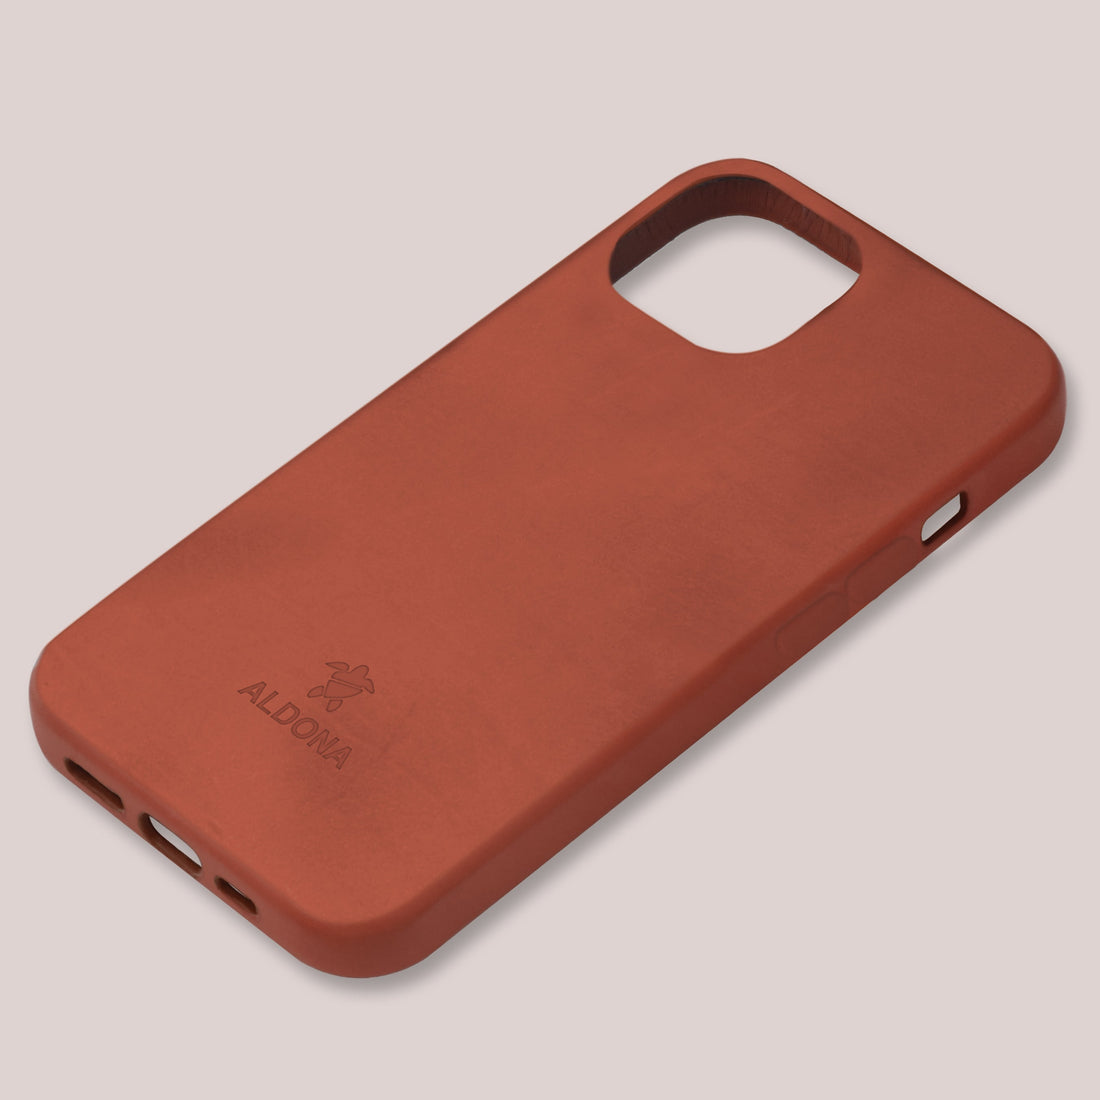 Kalon Case for iPhone 12 with MagSafe Compatibility - Dark Soil